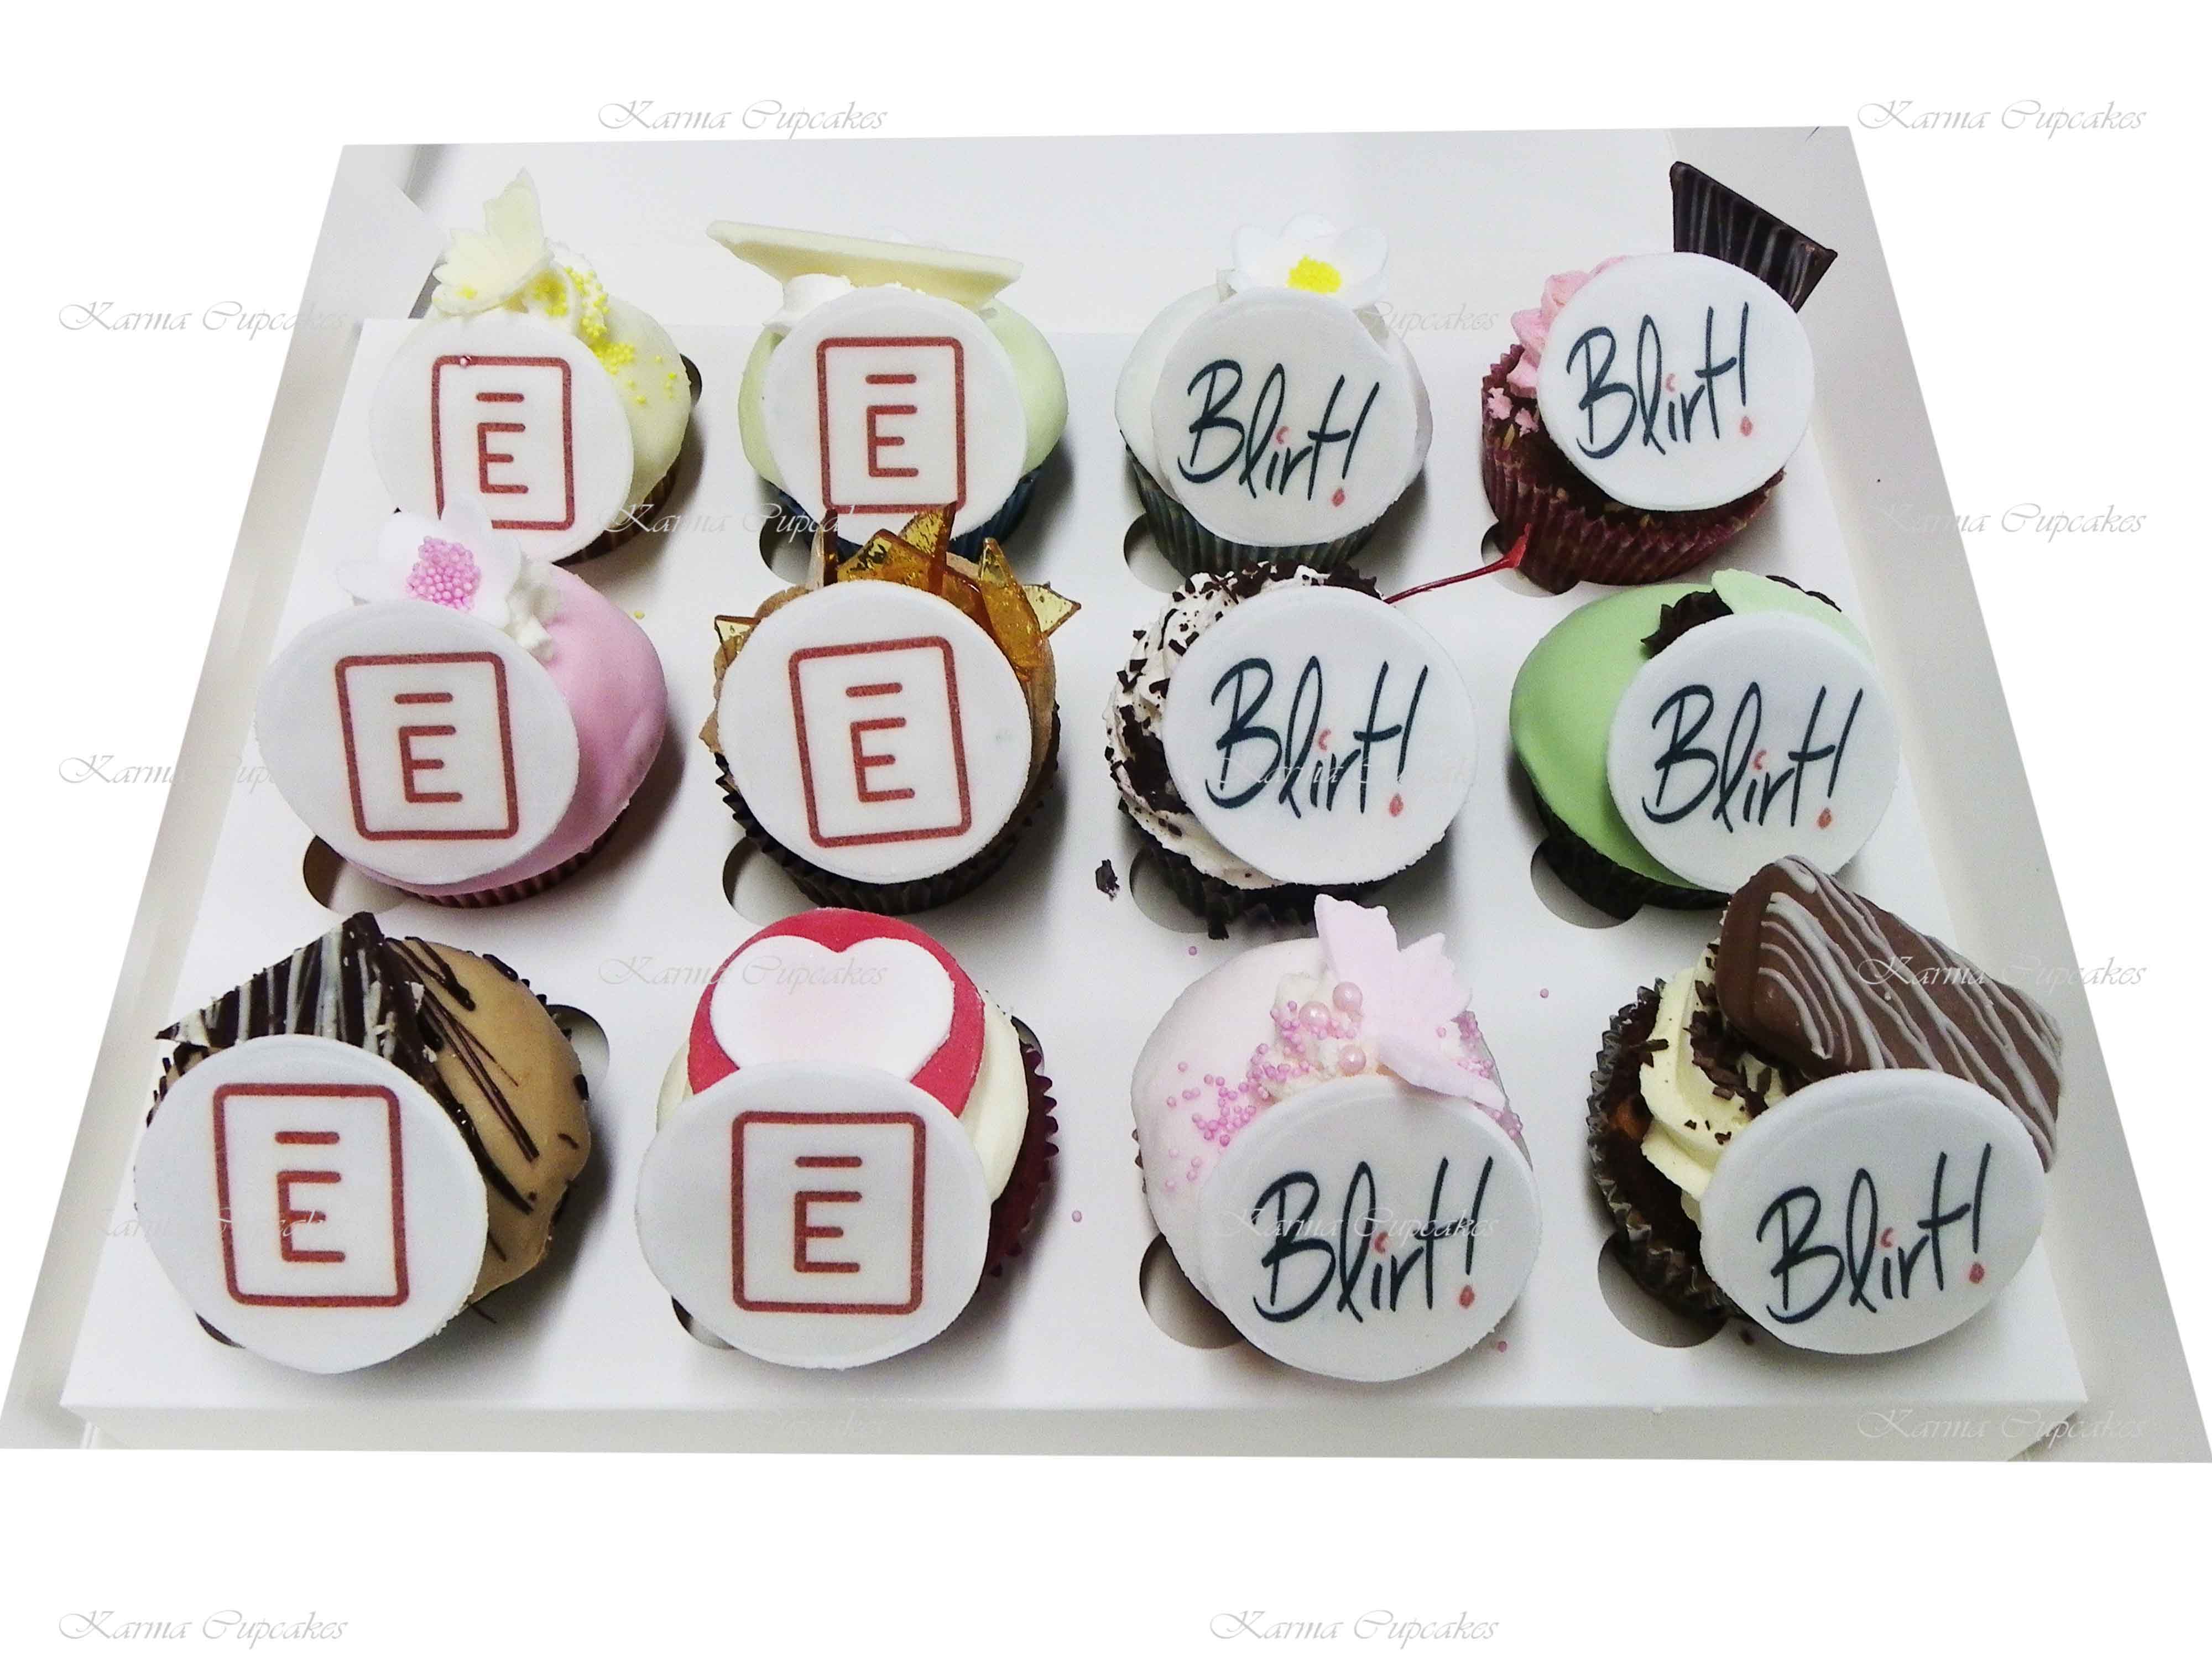 Mystery box of Gourmet Cupcakes with a Corporate Edible Image/ Logo